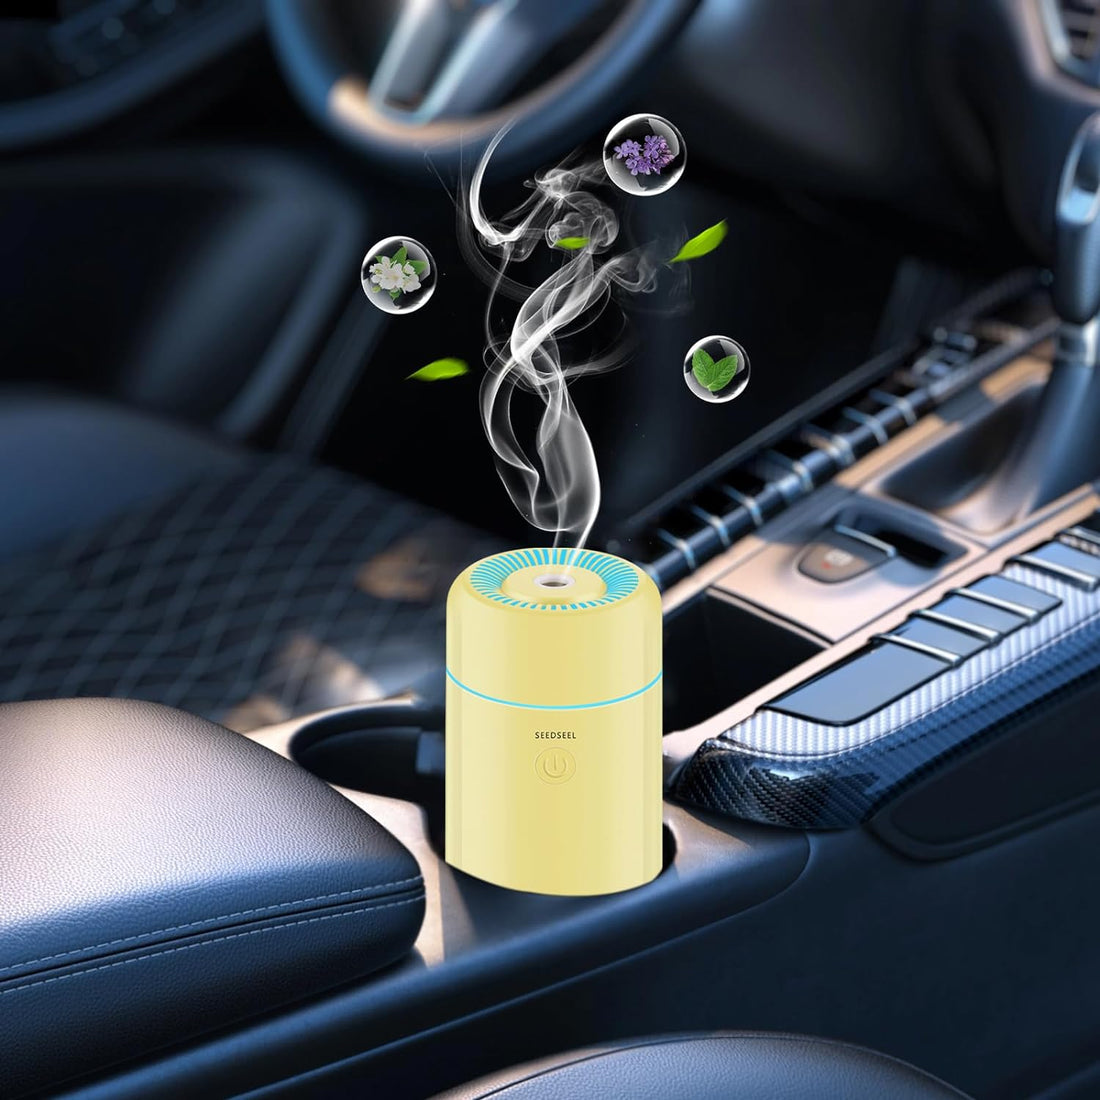 SEEDSEEL Car Diffuser,USB Small Cool Mist Aromatherapy Essential Oil Car Humidifier,7-LED Color Changing, Suitable for Car, Office,Home, Room.（Yellow）